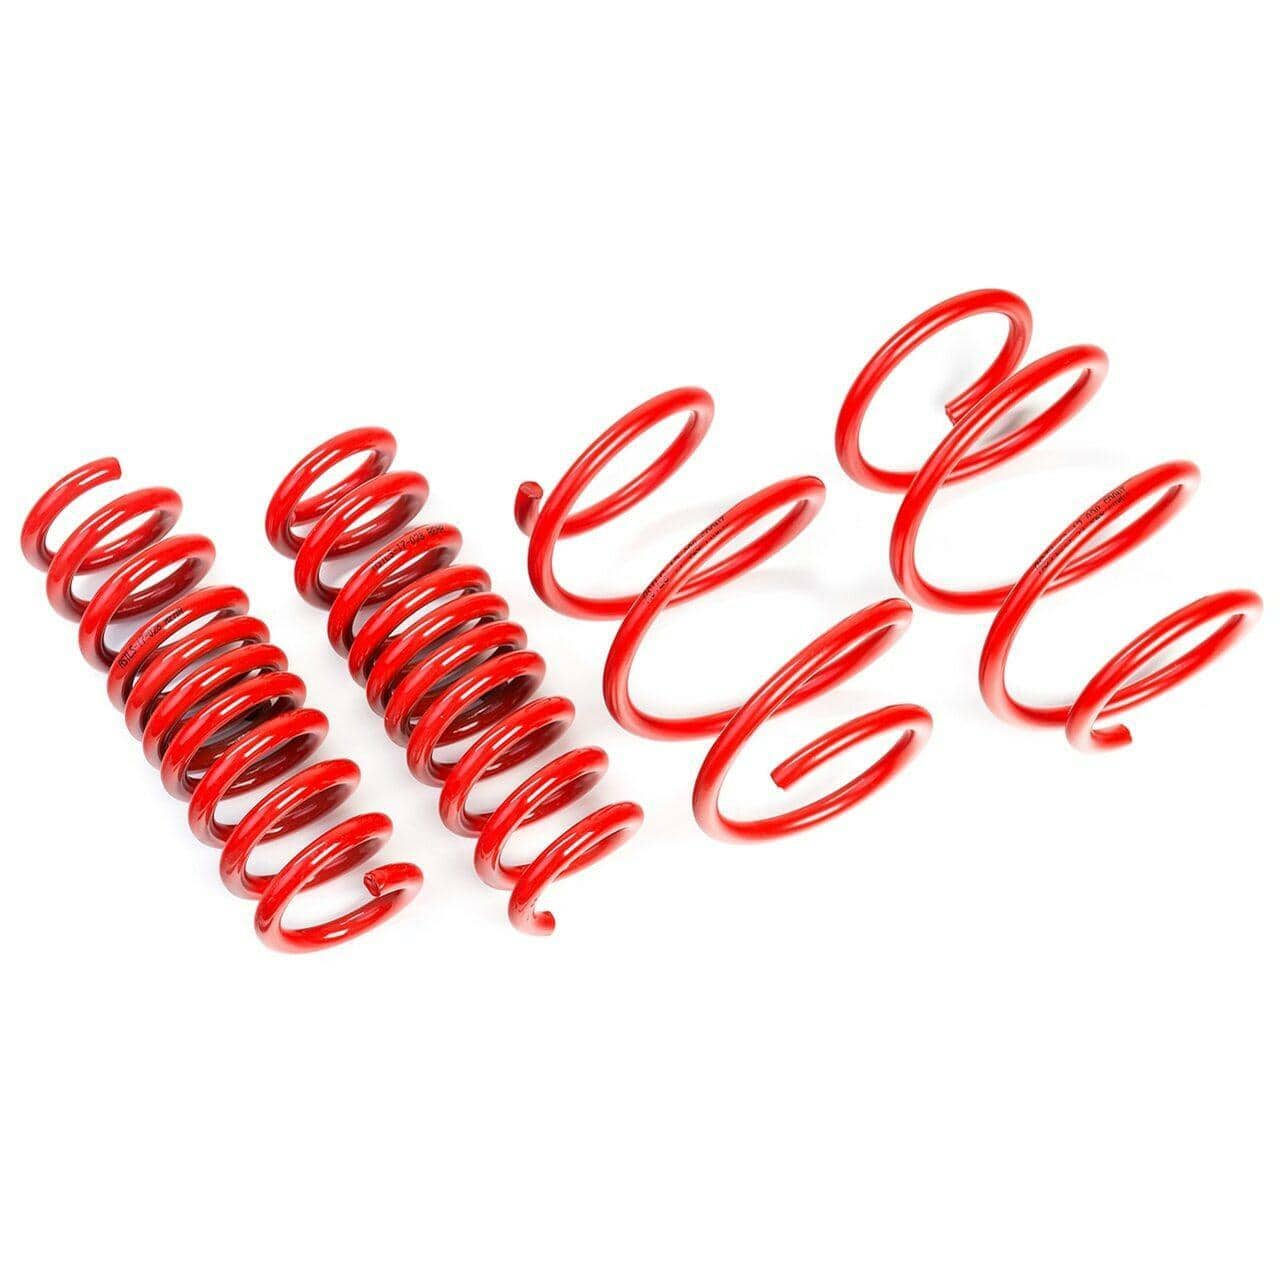 AST Suspension Lowering Springs (30MM/30MM) - 2012+ Mitsubishi Space Star Mirage 1.0/1.2 (A05A) ASTLS-14-1395